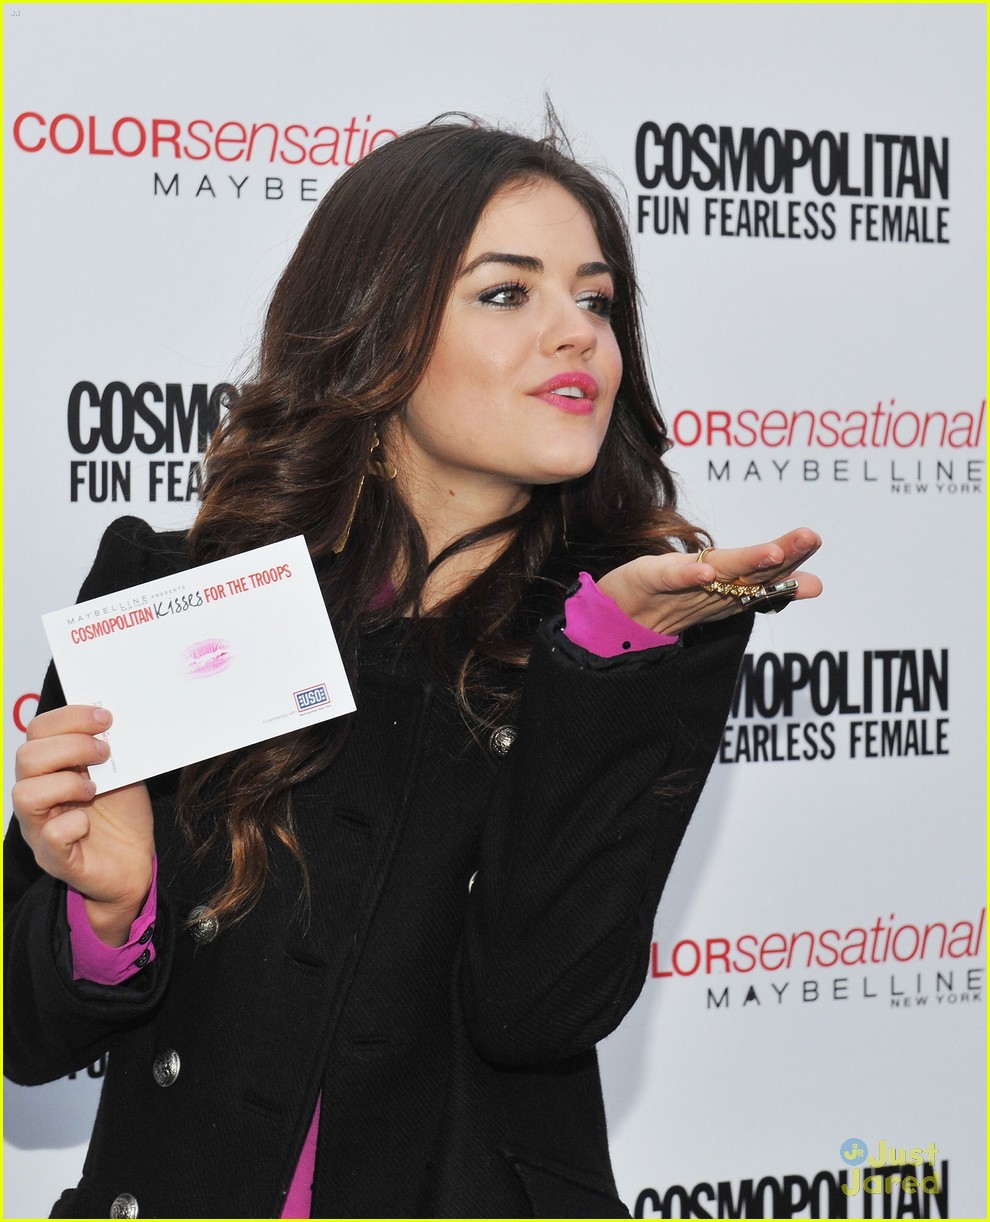 lucy hale cosmo kisses troops 04